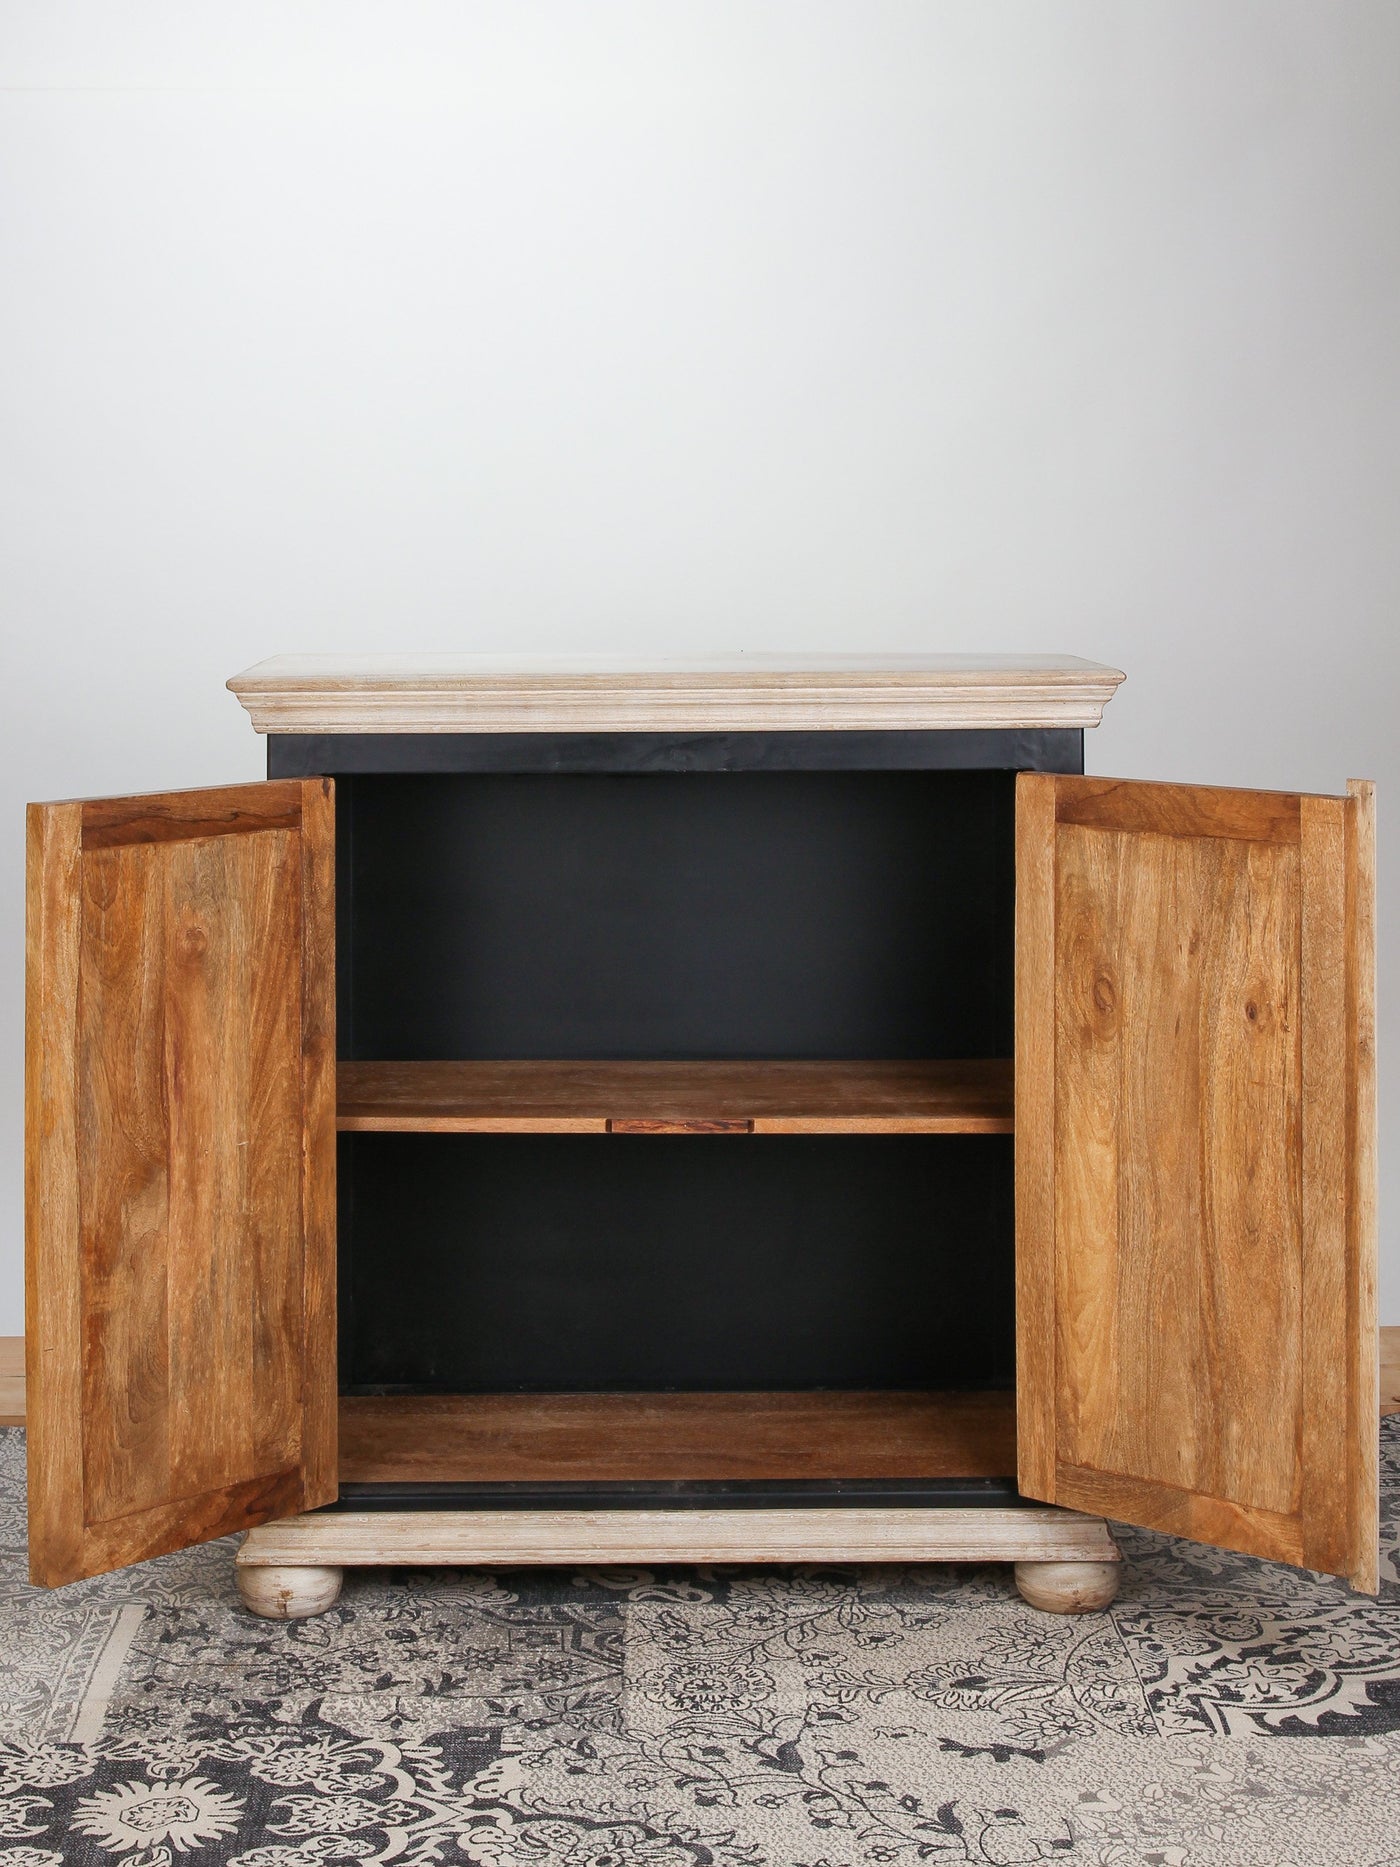 Hand Carved Mangifera Industrial Cabinet